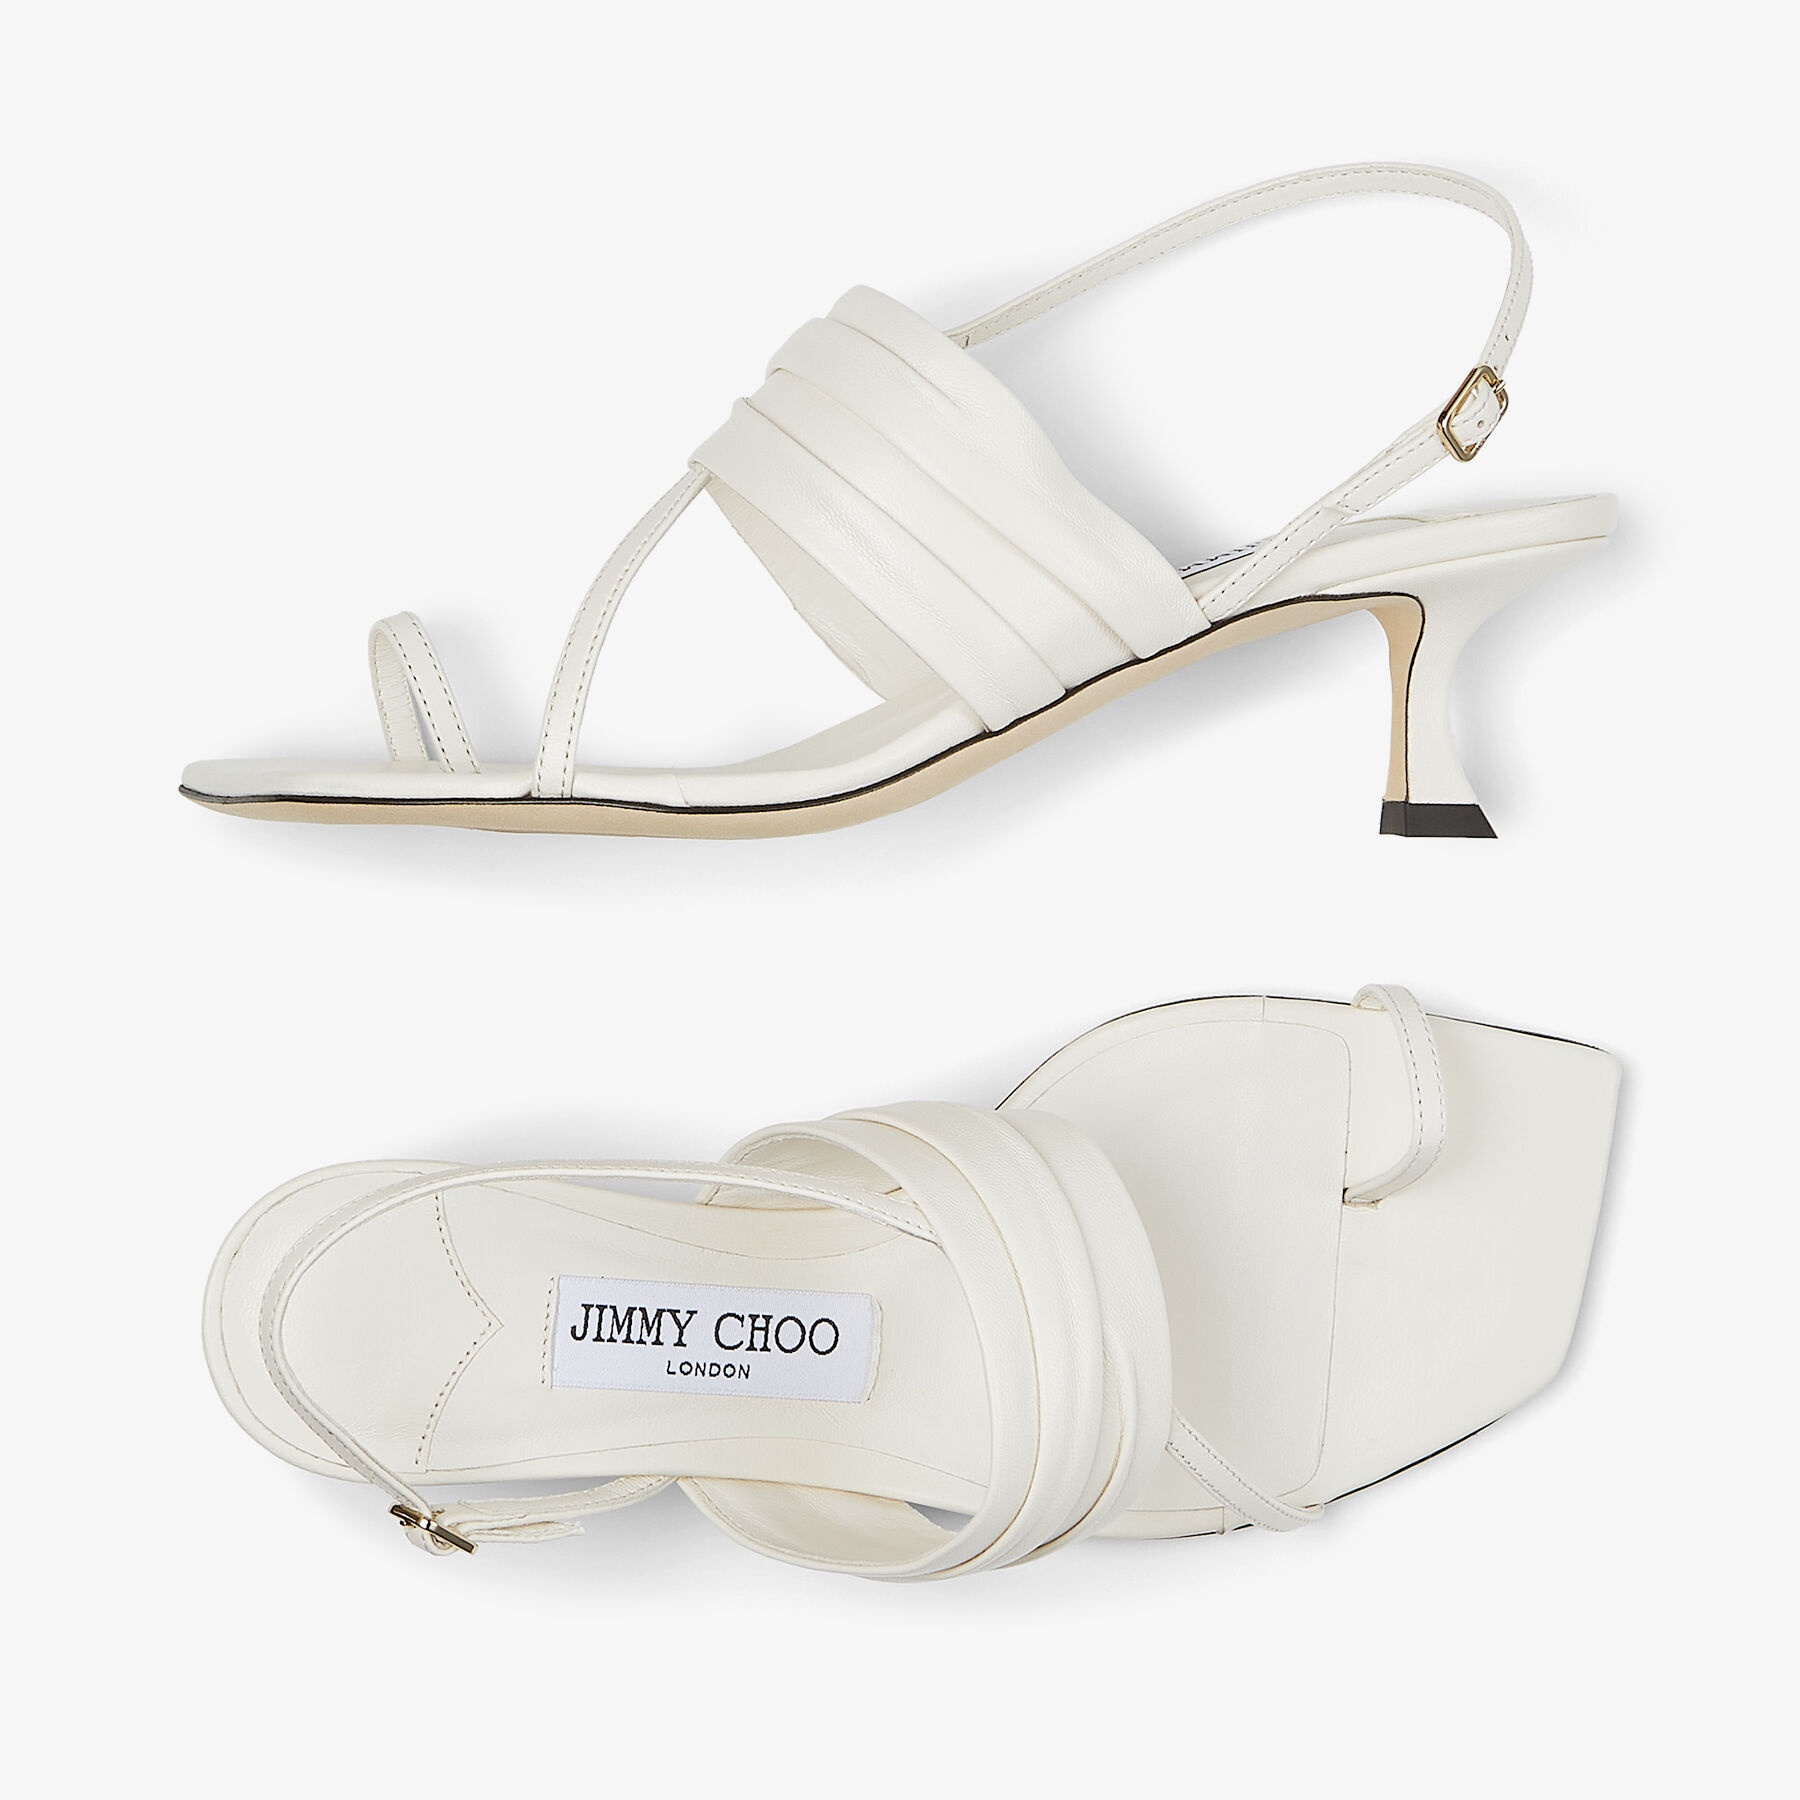 Beziers 50
Latte Nappa Leather Sandals - 5